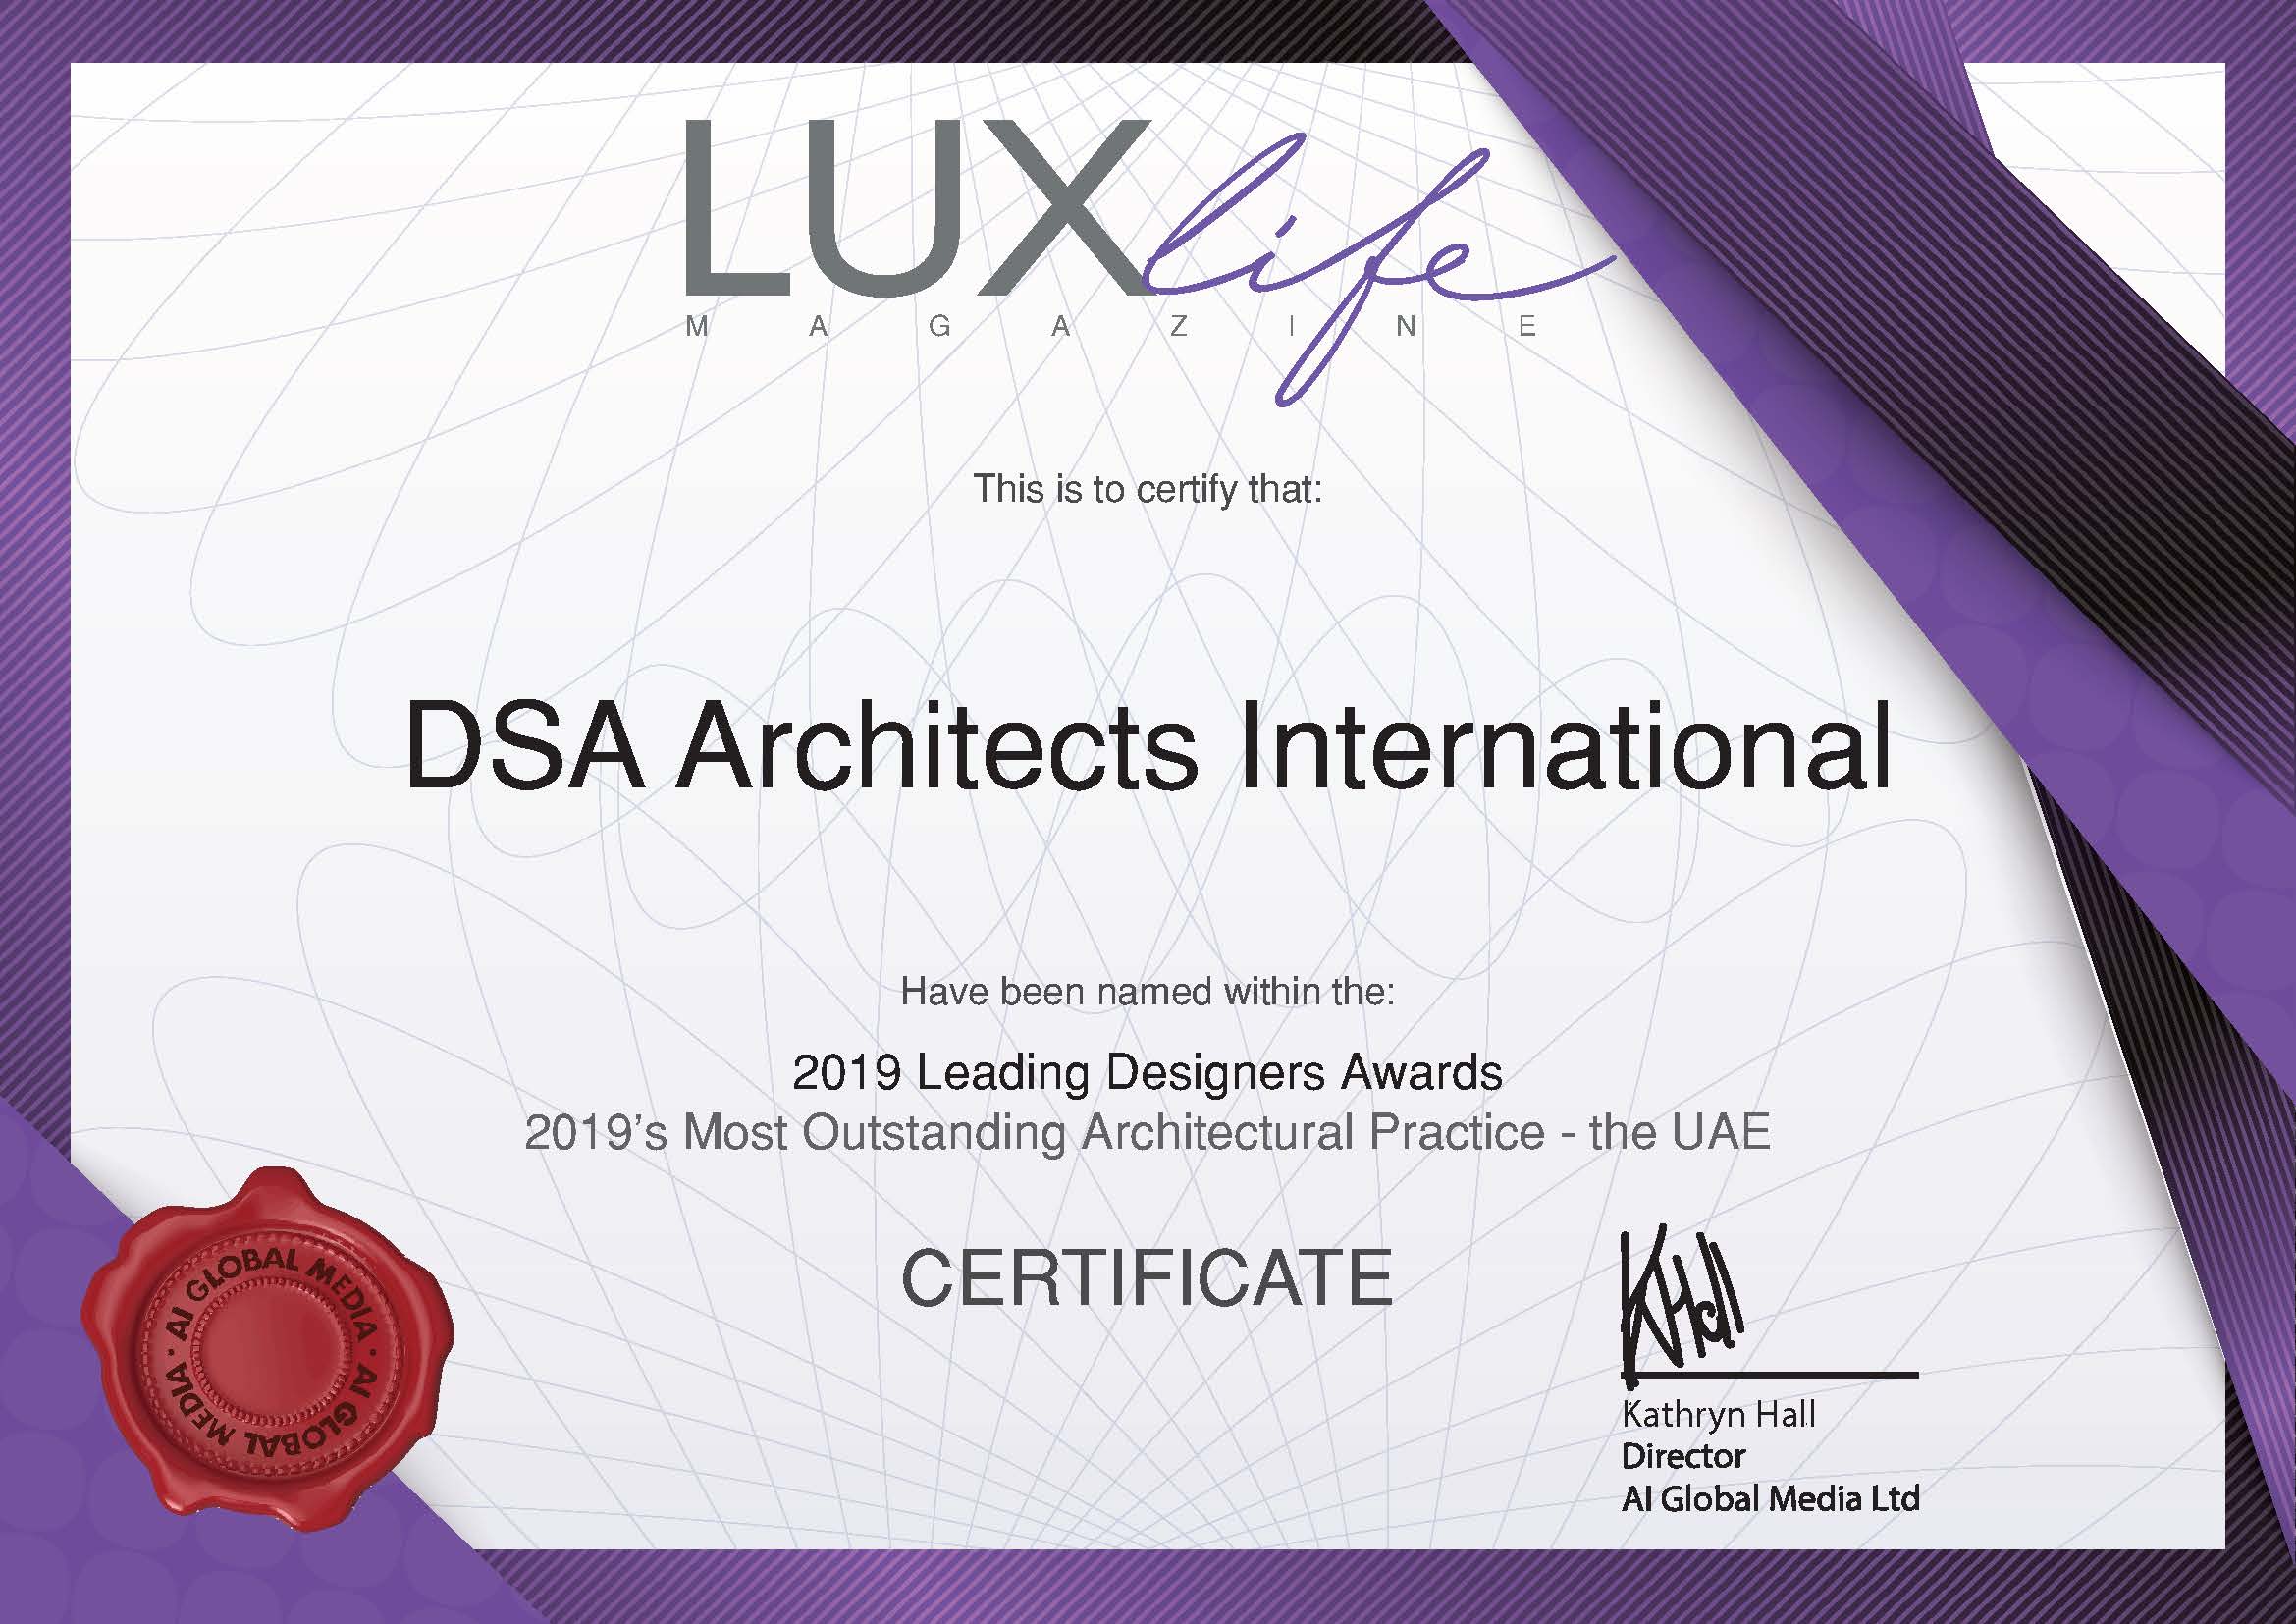 Lux Life Magazine #39 s Most Outstanding Architectural Practice in the UAE